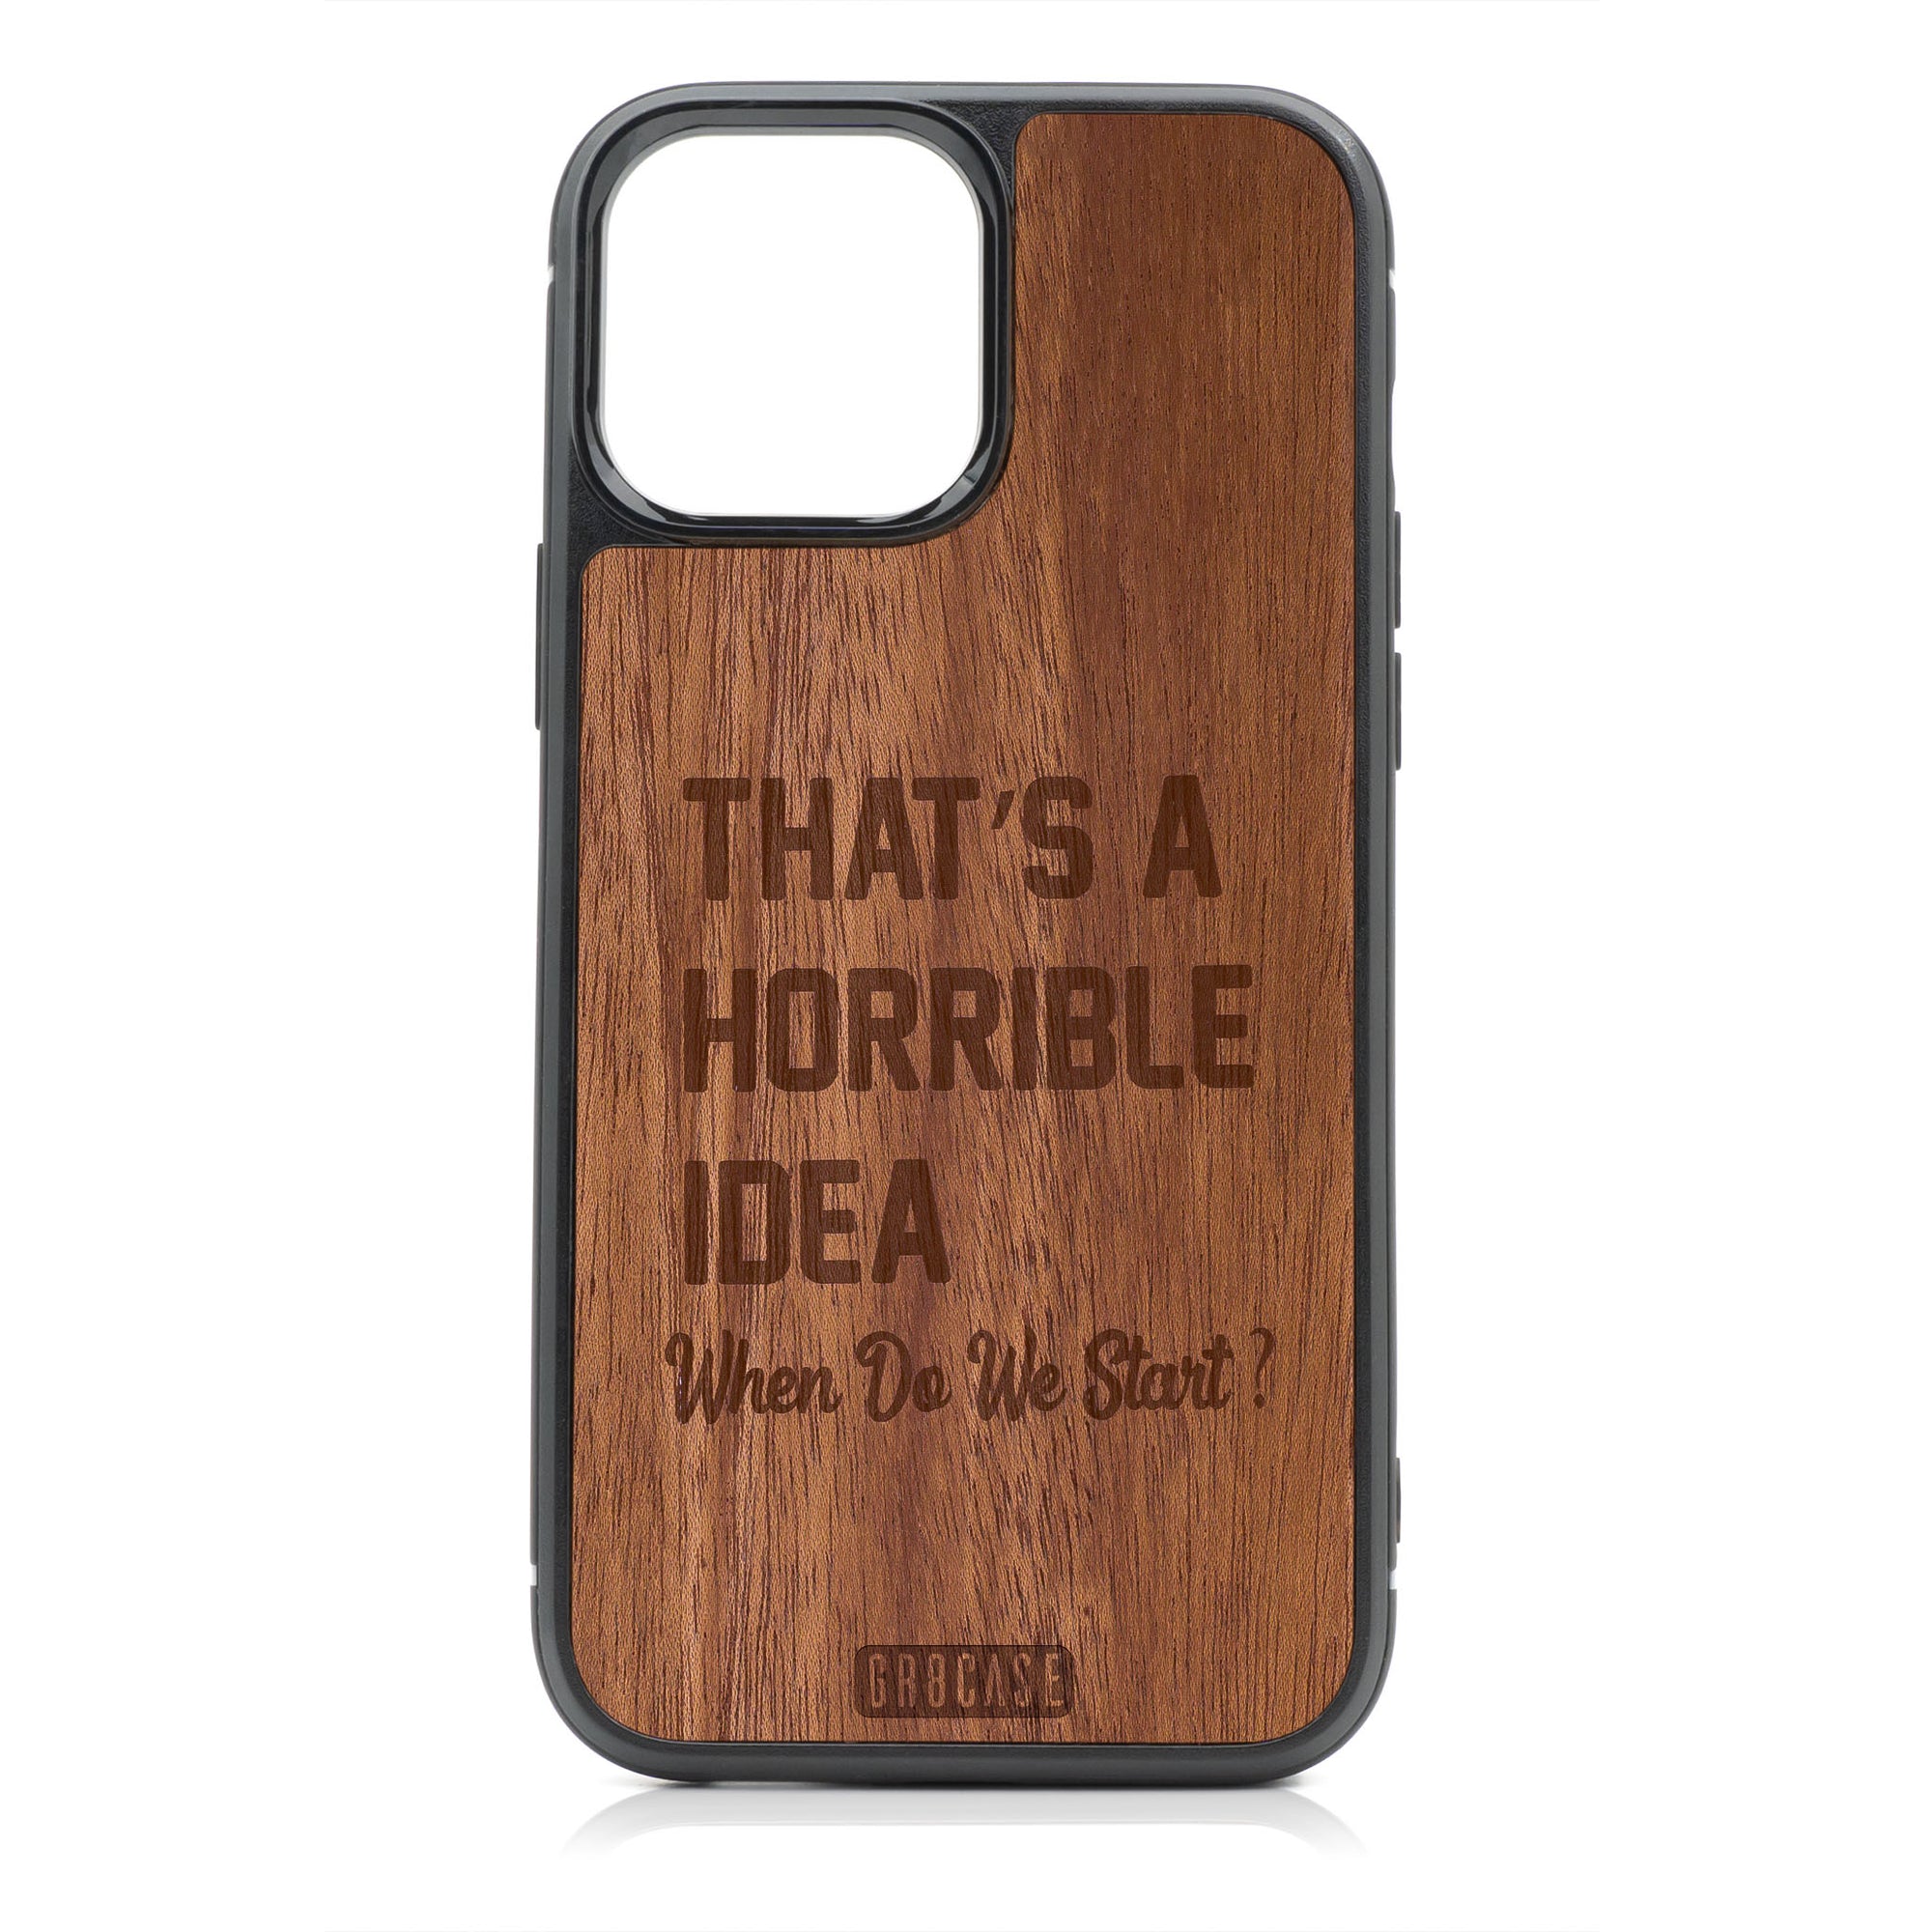 That's A Horrible Idea When Do We Start? Design Wood Case For iPhone 13 Pro Max